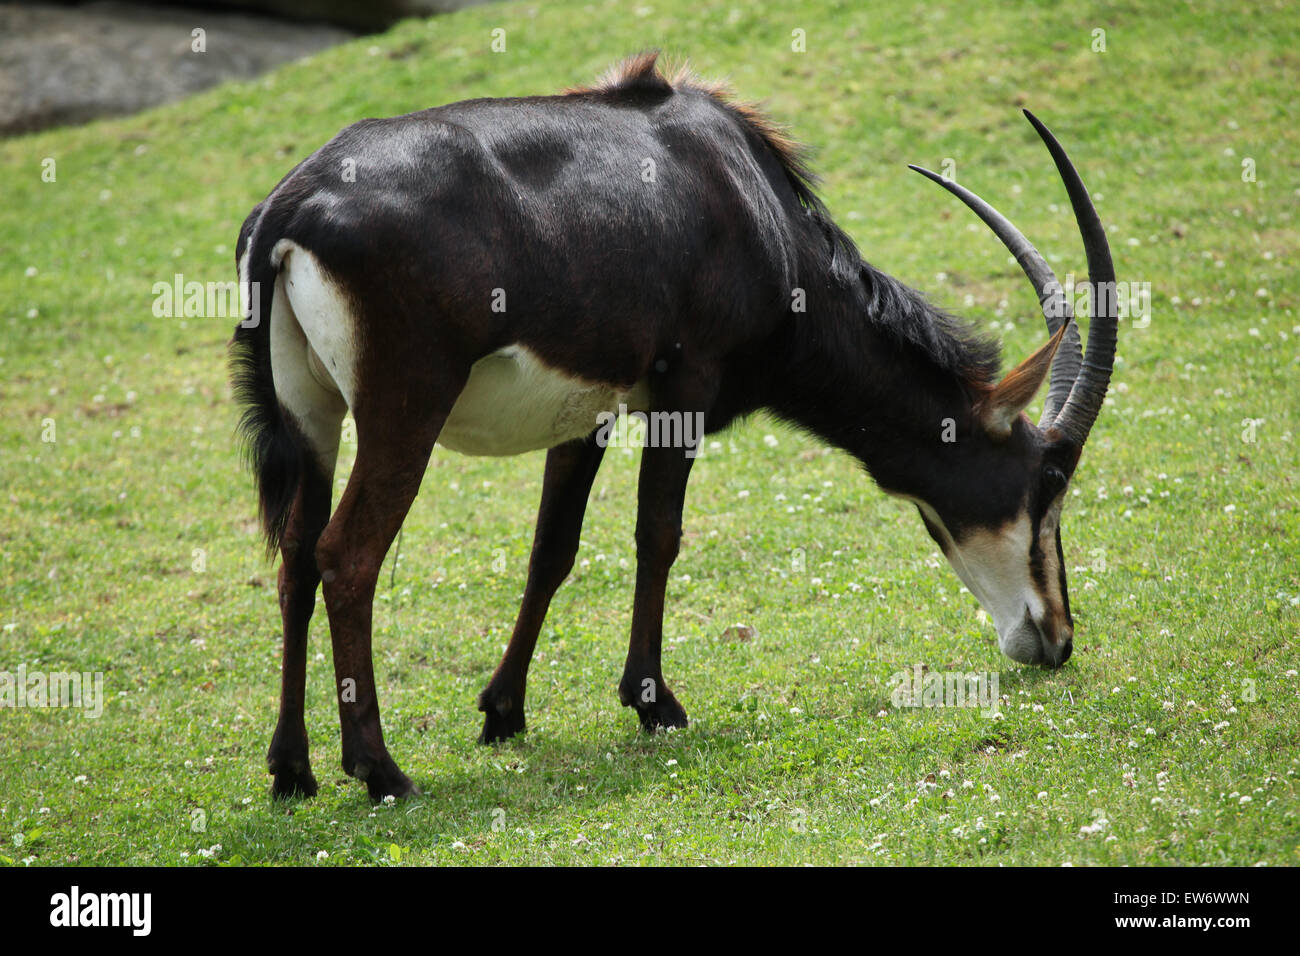 Sable antelope (Hippotragus niger), also known as the black antelope at Prague Zoo, Czech Republic. Stock Photo